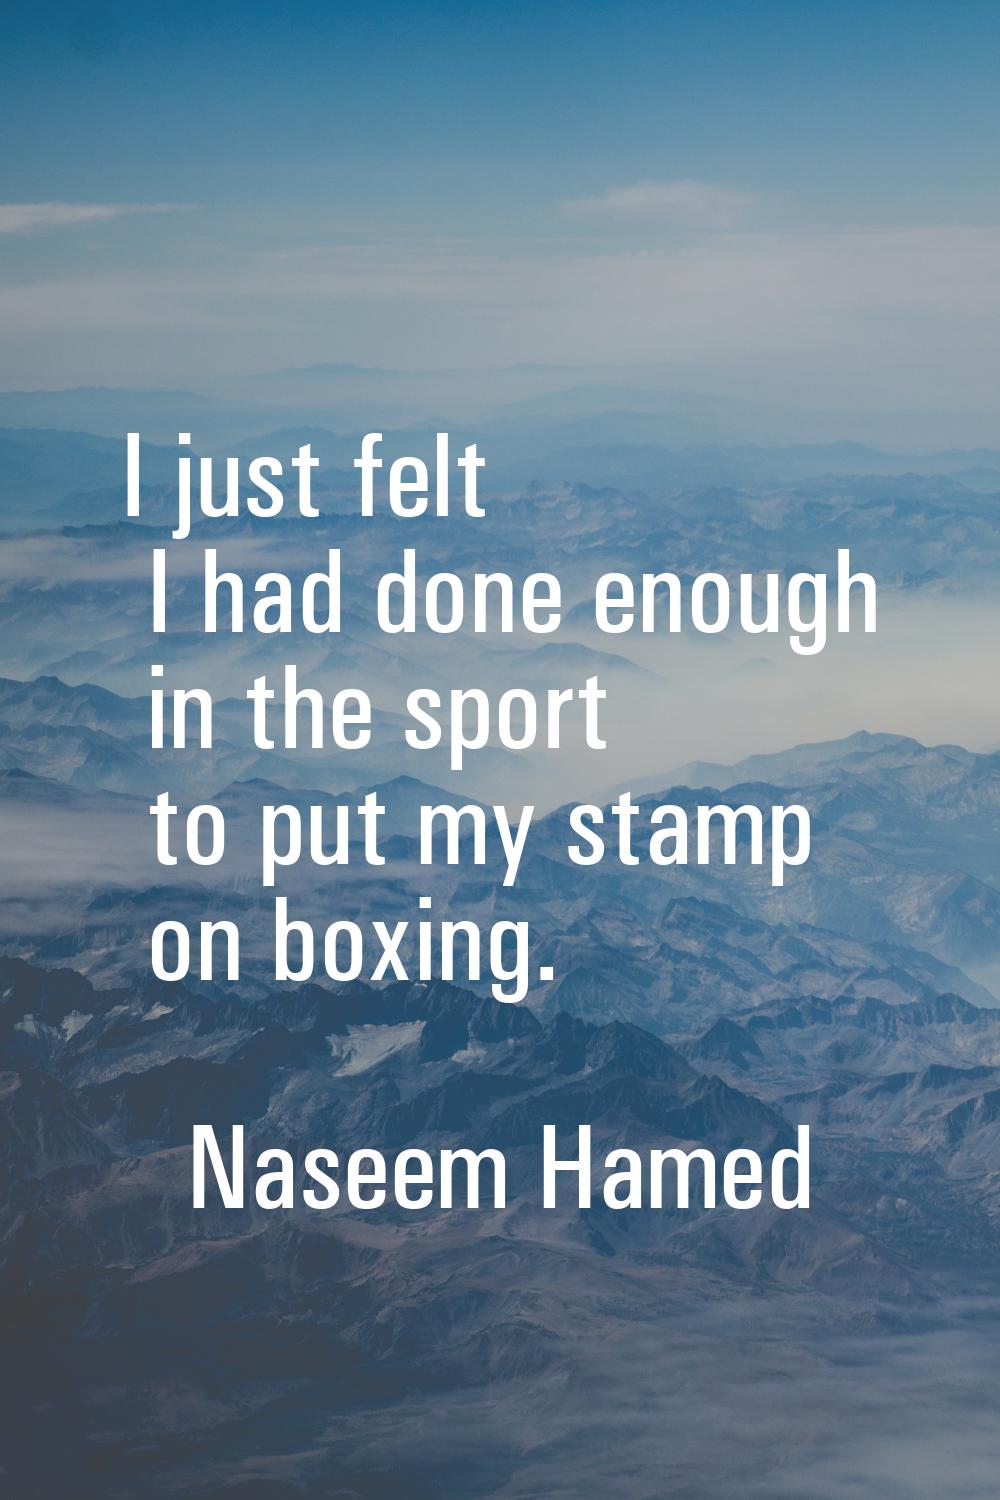 I just felt I had done enough in the sport to put my stamp on boxing.